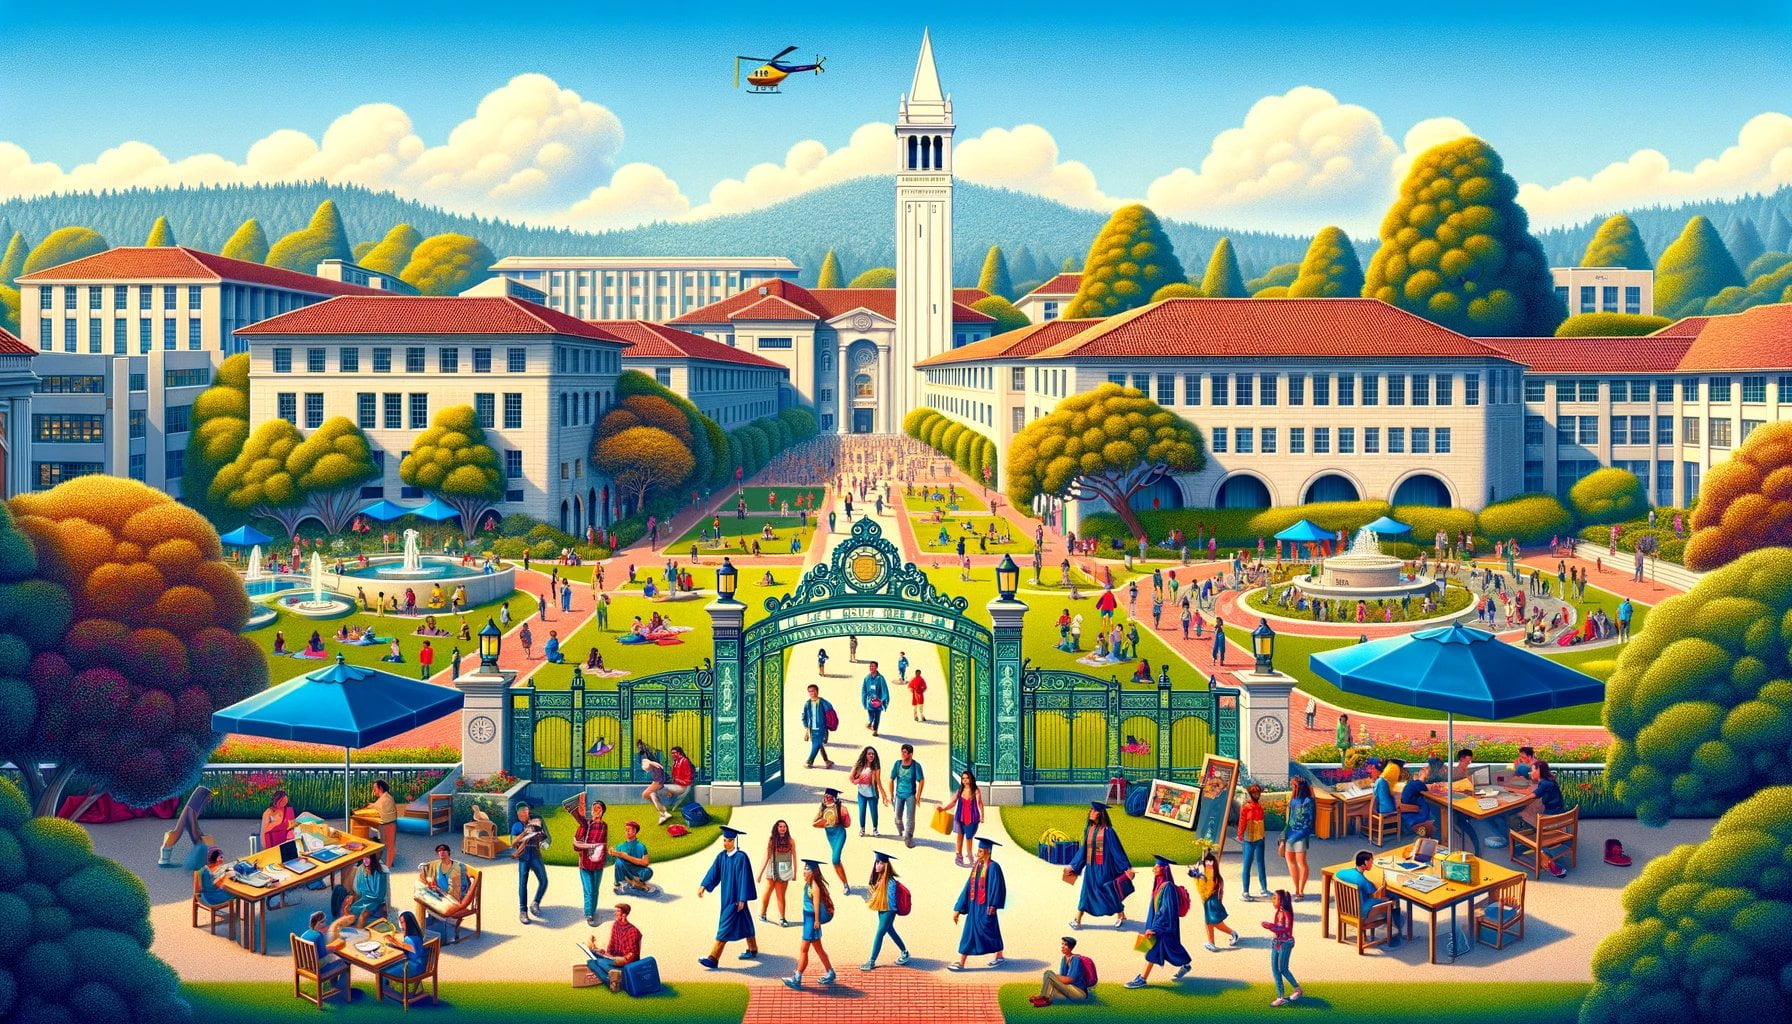 fun facts about UC Berkeley